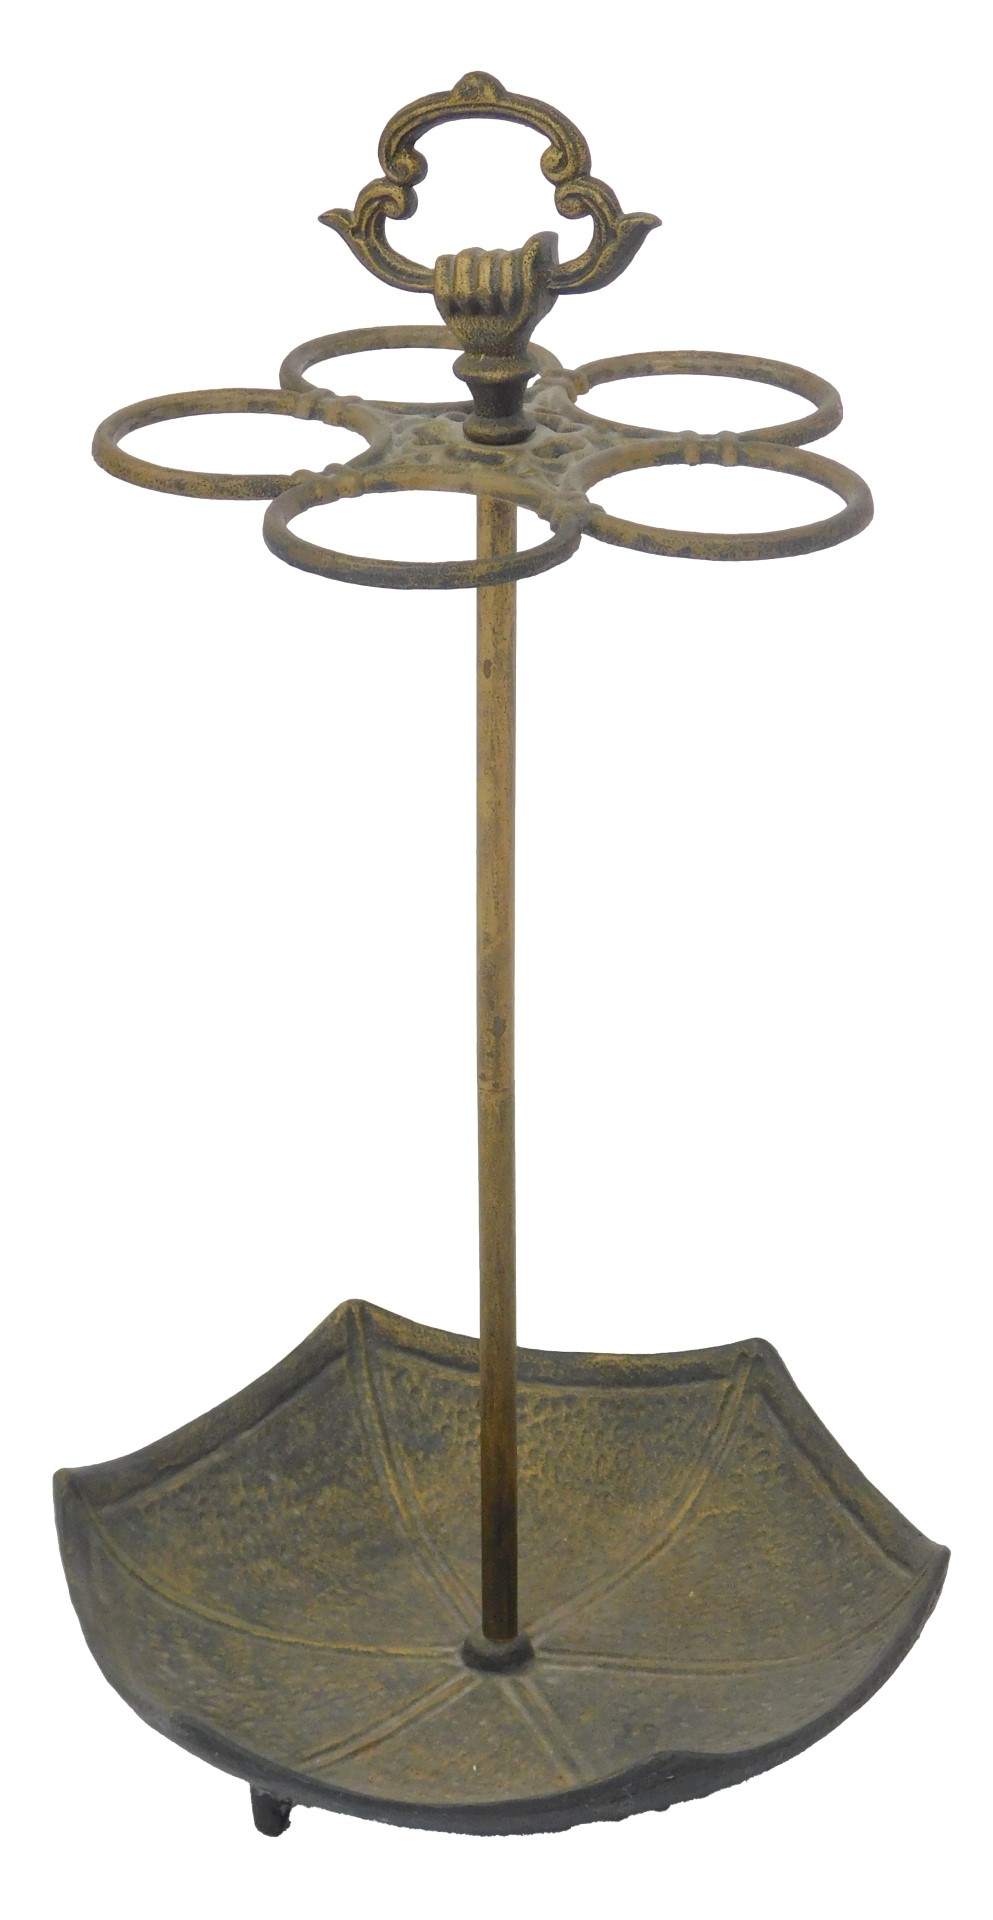 A 20thC cast iron umbrella stand, modelled as an upturned umbrella with five ring sections for